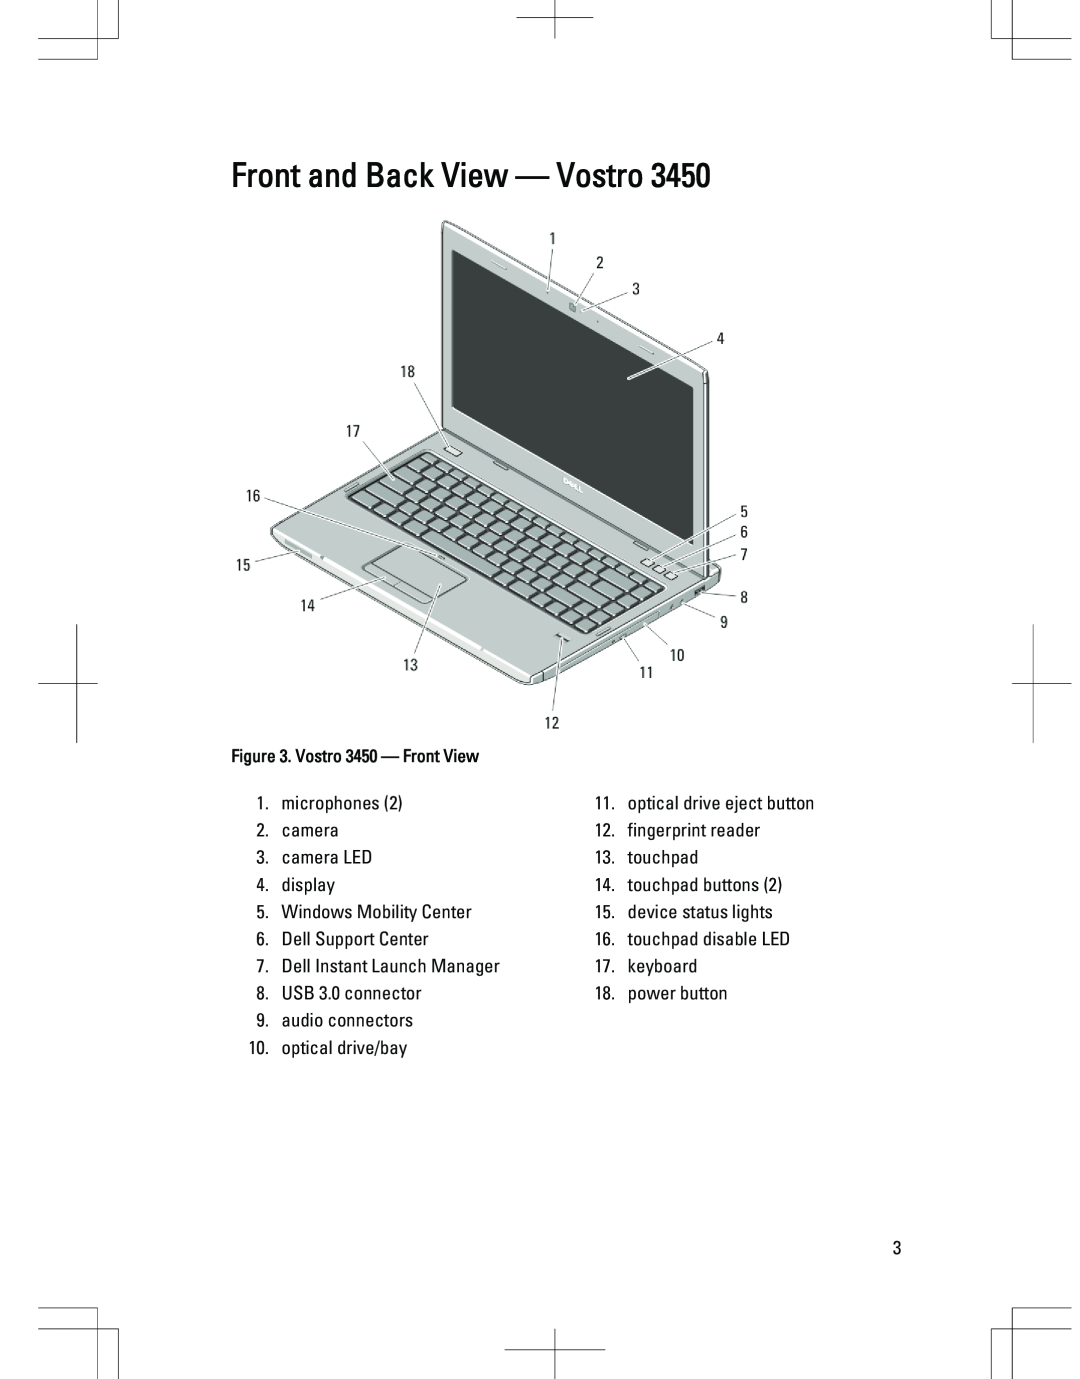 Dell 3350, 3550, 3555, 3750 manual Front and Back View - Vostro, Vostro 3450 - Front View 